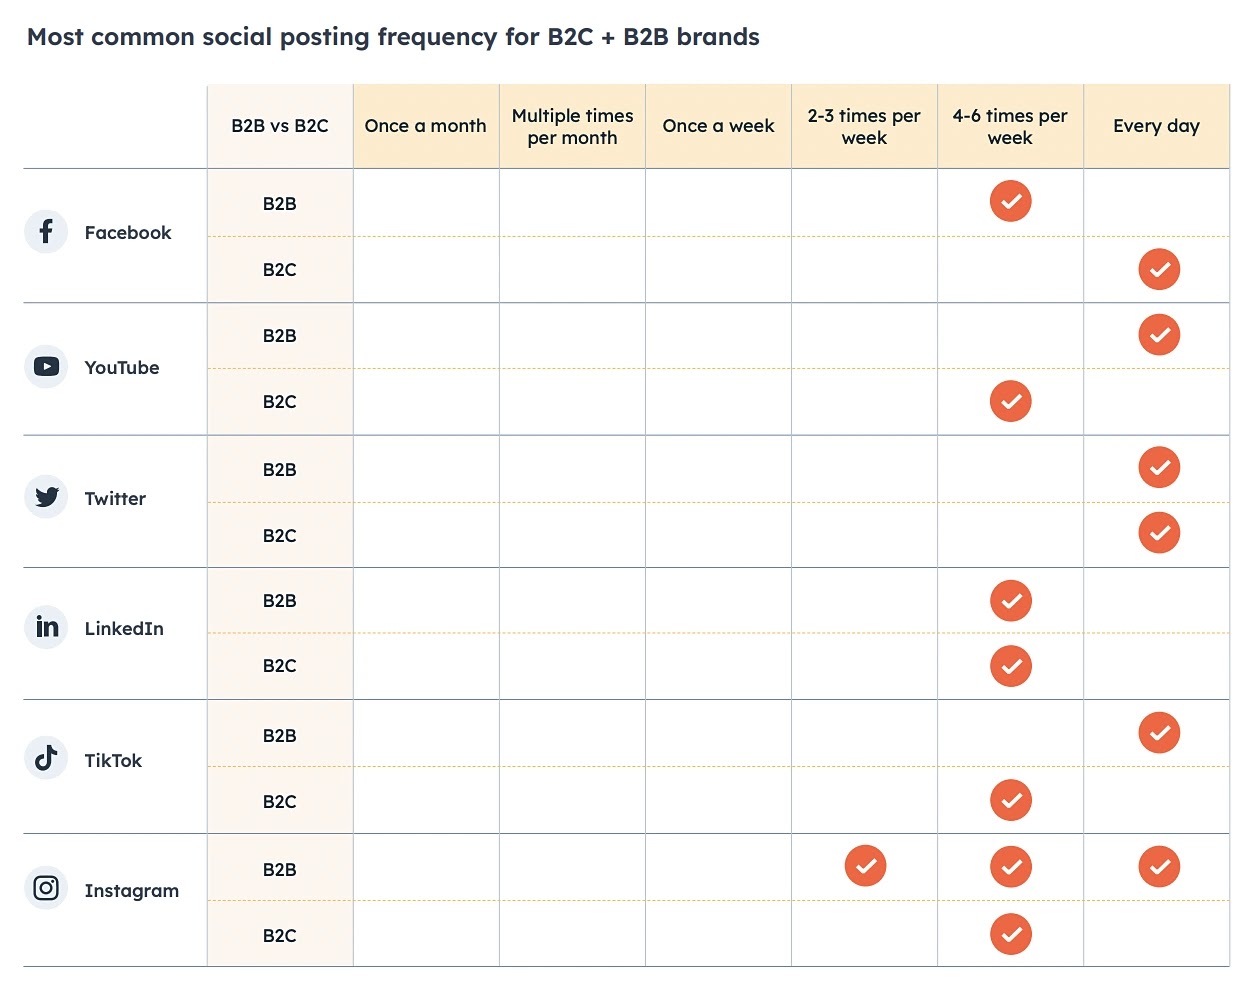 Hubspot's data showing the most common posting schedules for B2C and B2B brands